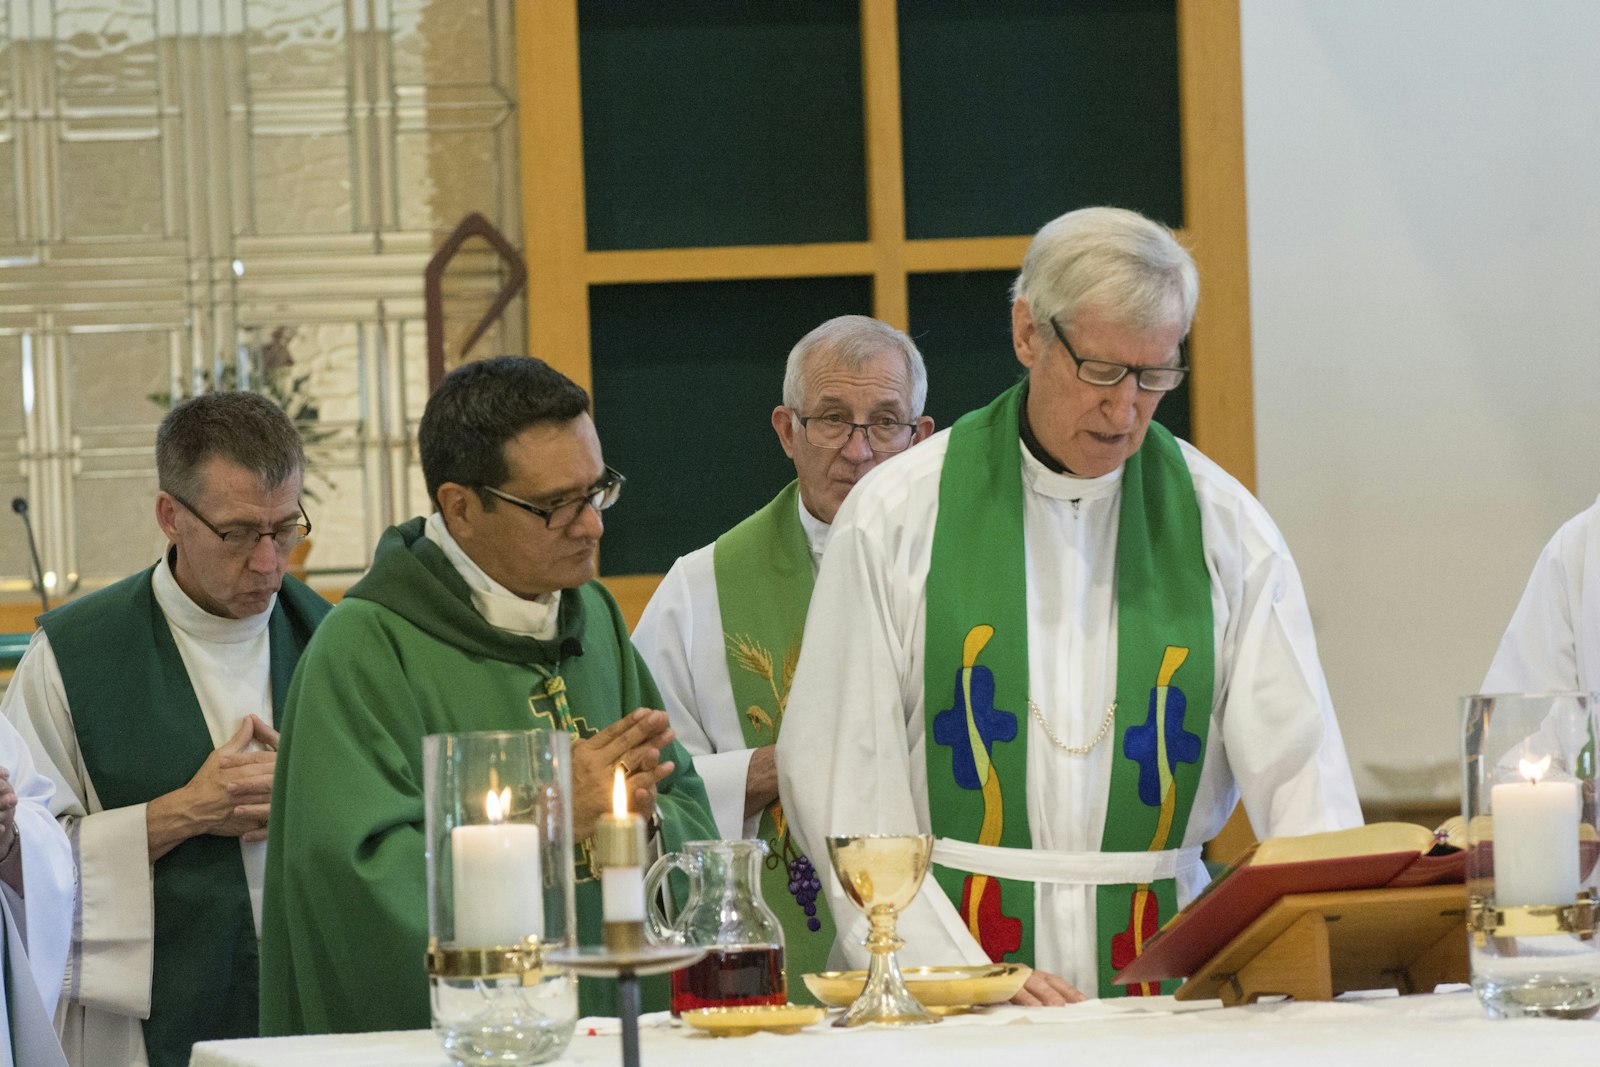 Fr. Frawley, right, celebrates Mass at St. Anne Parish in Ortonville alongside Auxiliary Bishop Arturo Cepeda and priests of neighboring parishes. (Courtesy photo)